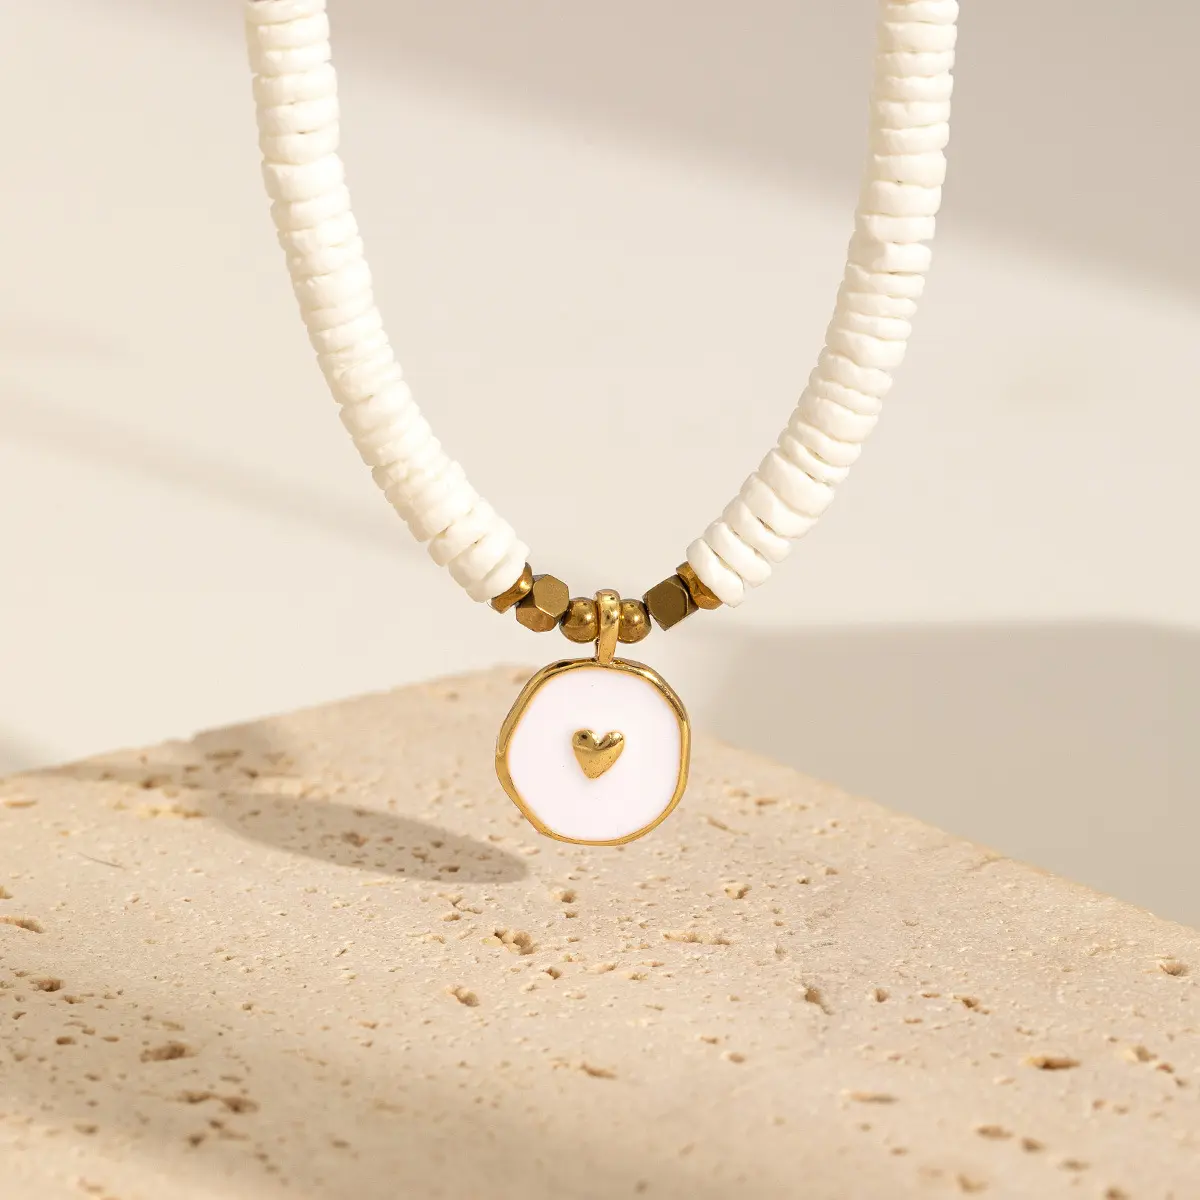 18K Gold Plated Stainless Steel Circular Inlaid Natural White Shell Heart Pendant Necklace Jewelry for Women